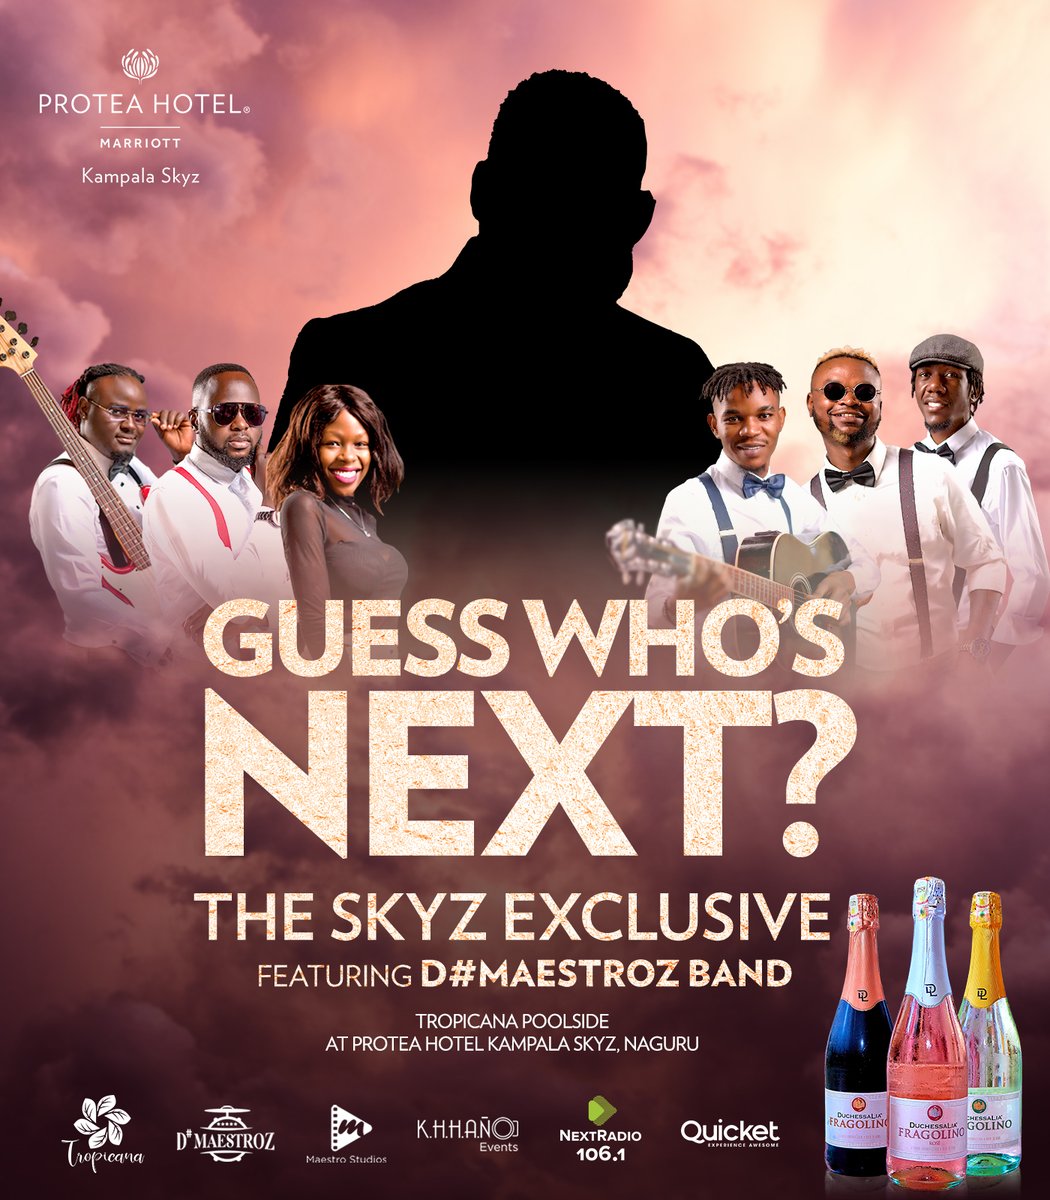 🌟🤔 Guess who's gracing us with their presence next at #TheSkyzExclusive?

Put on your detective hats and drop your guesses below! Get it right and you could win some amazing prizes!

Stay tuned for the big reveal!

#GuessTheGuest #SkyzExclusive #WinBig